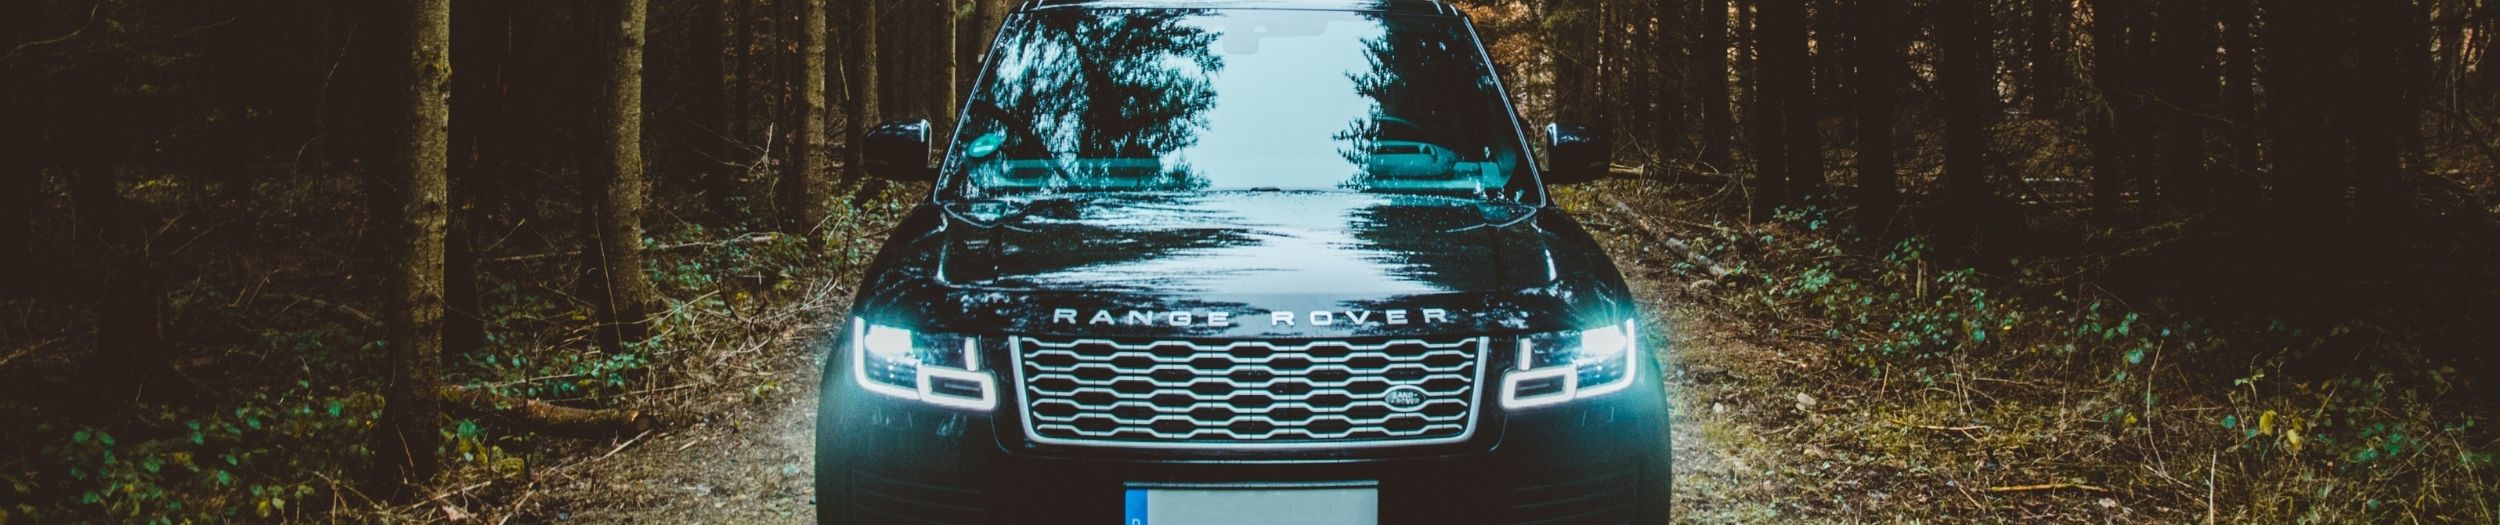 Range Rover in Forest